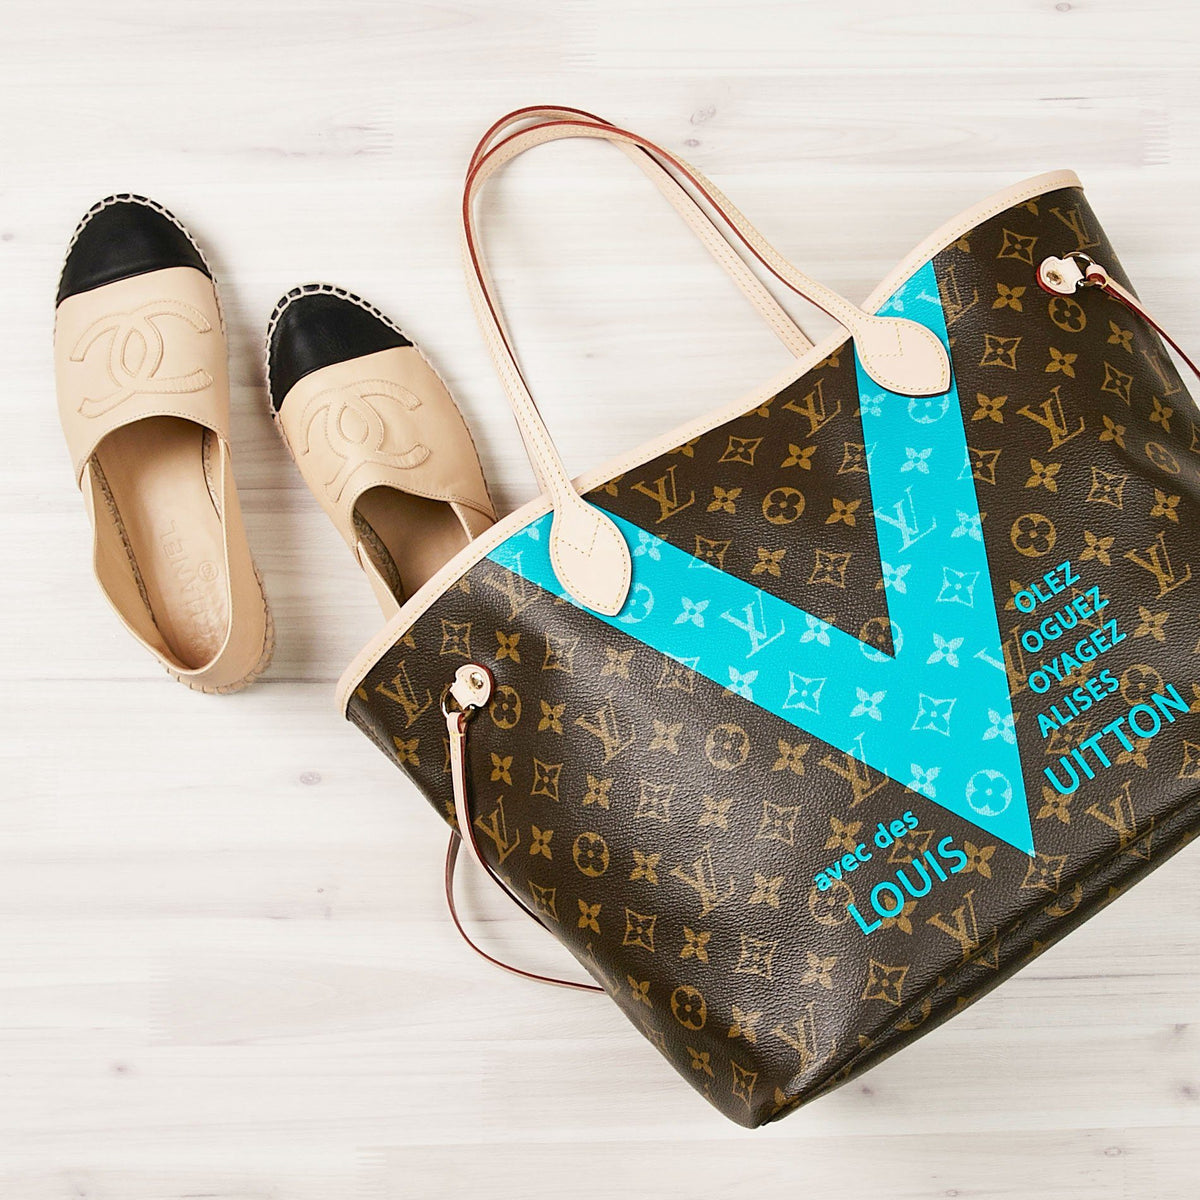 How to Authenticate Louis Vuitton. 10 Tips With Pictures! - MISLUX